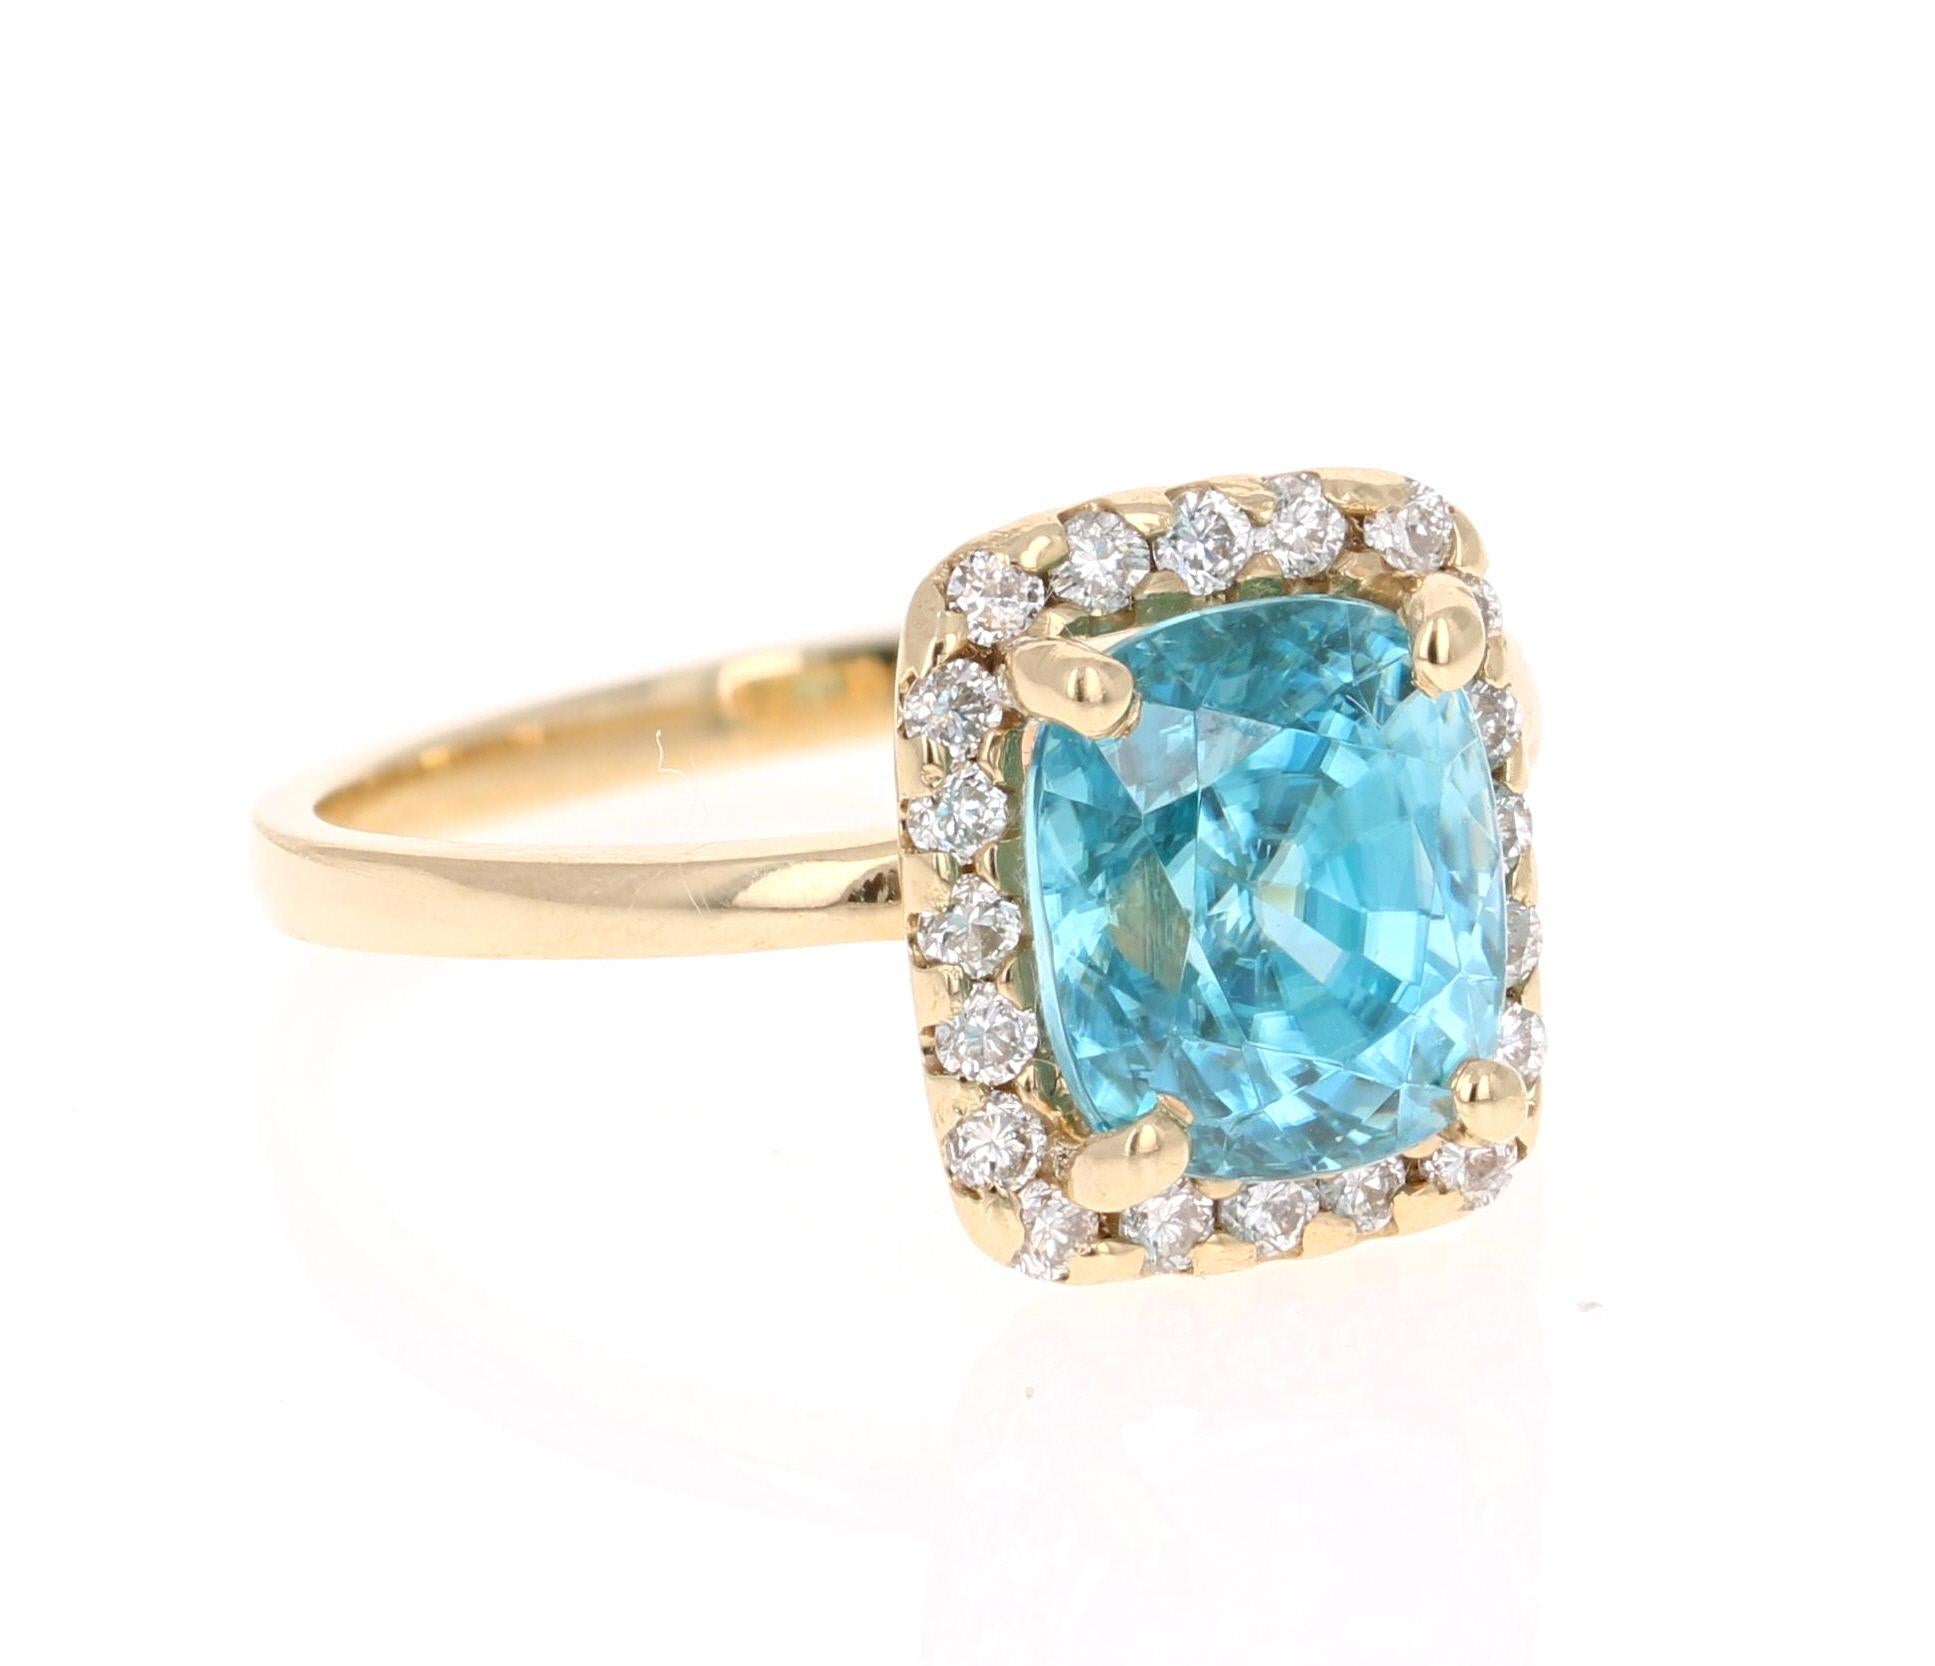 A beautiful Blue Zircon and Diamond ring that can be a nice Engagement ring or just an everyday ring!
Blue Zircon is a natural stone mined mainly in Sri Lanka, Myanmar, and Australia.  
This ring has a beautiful Cushion Cut Blue Zircon that weighs